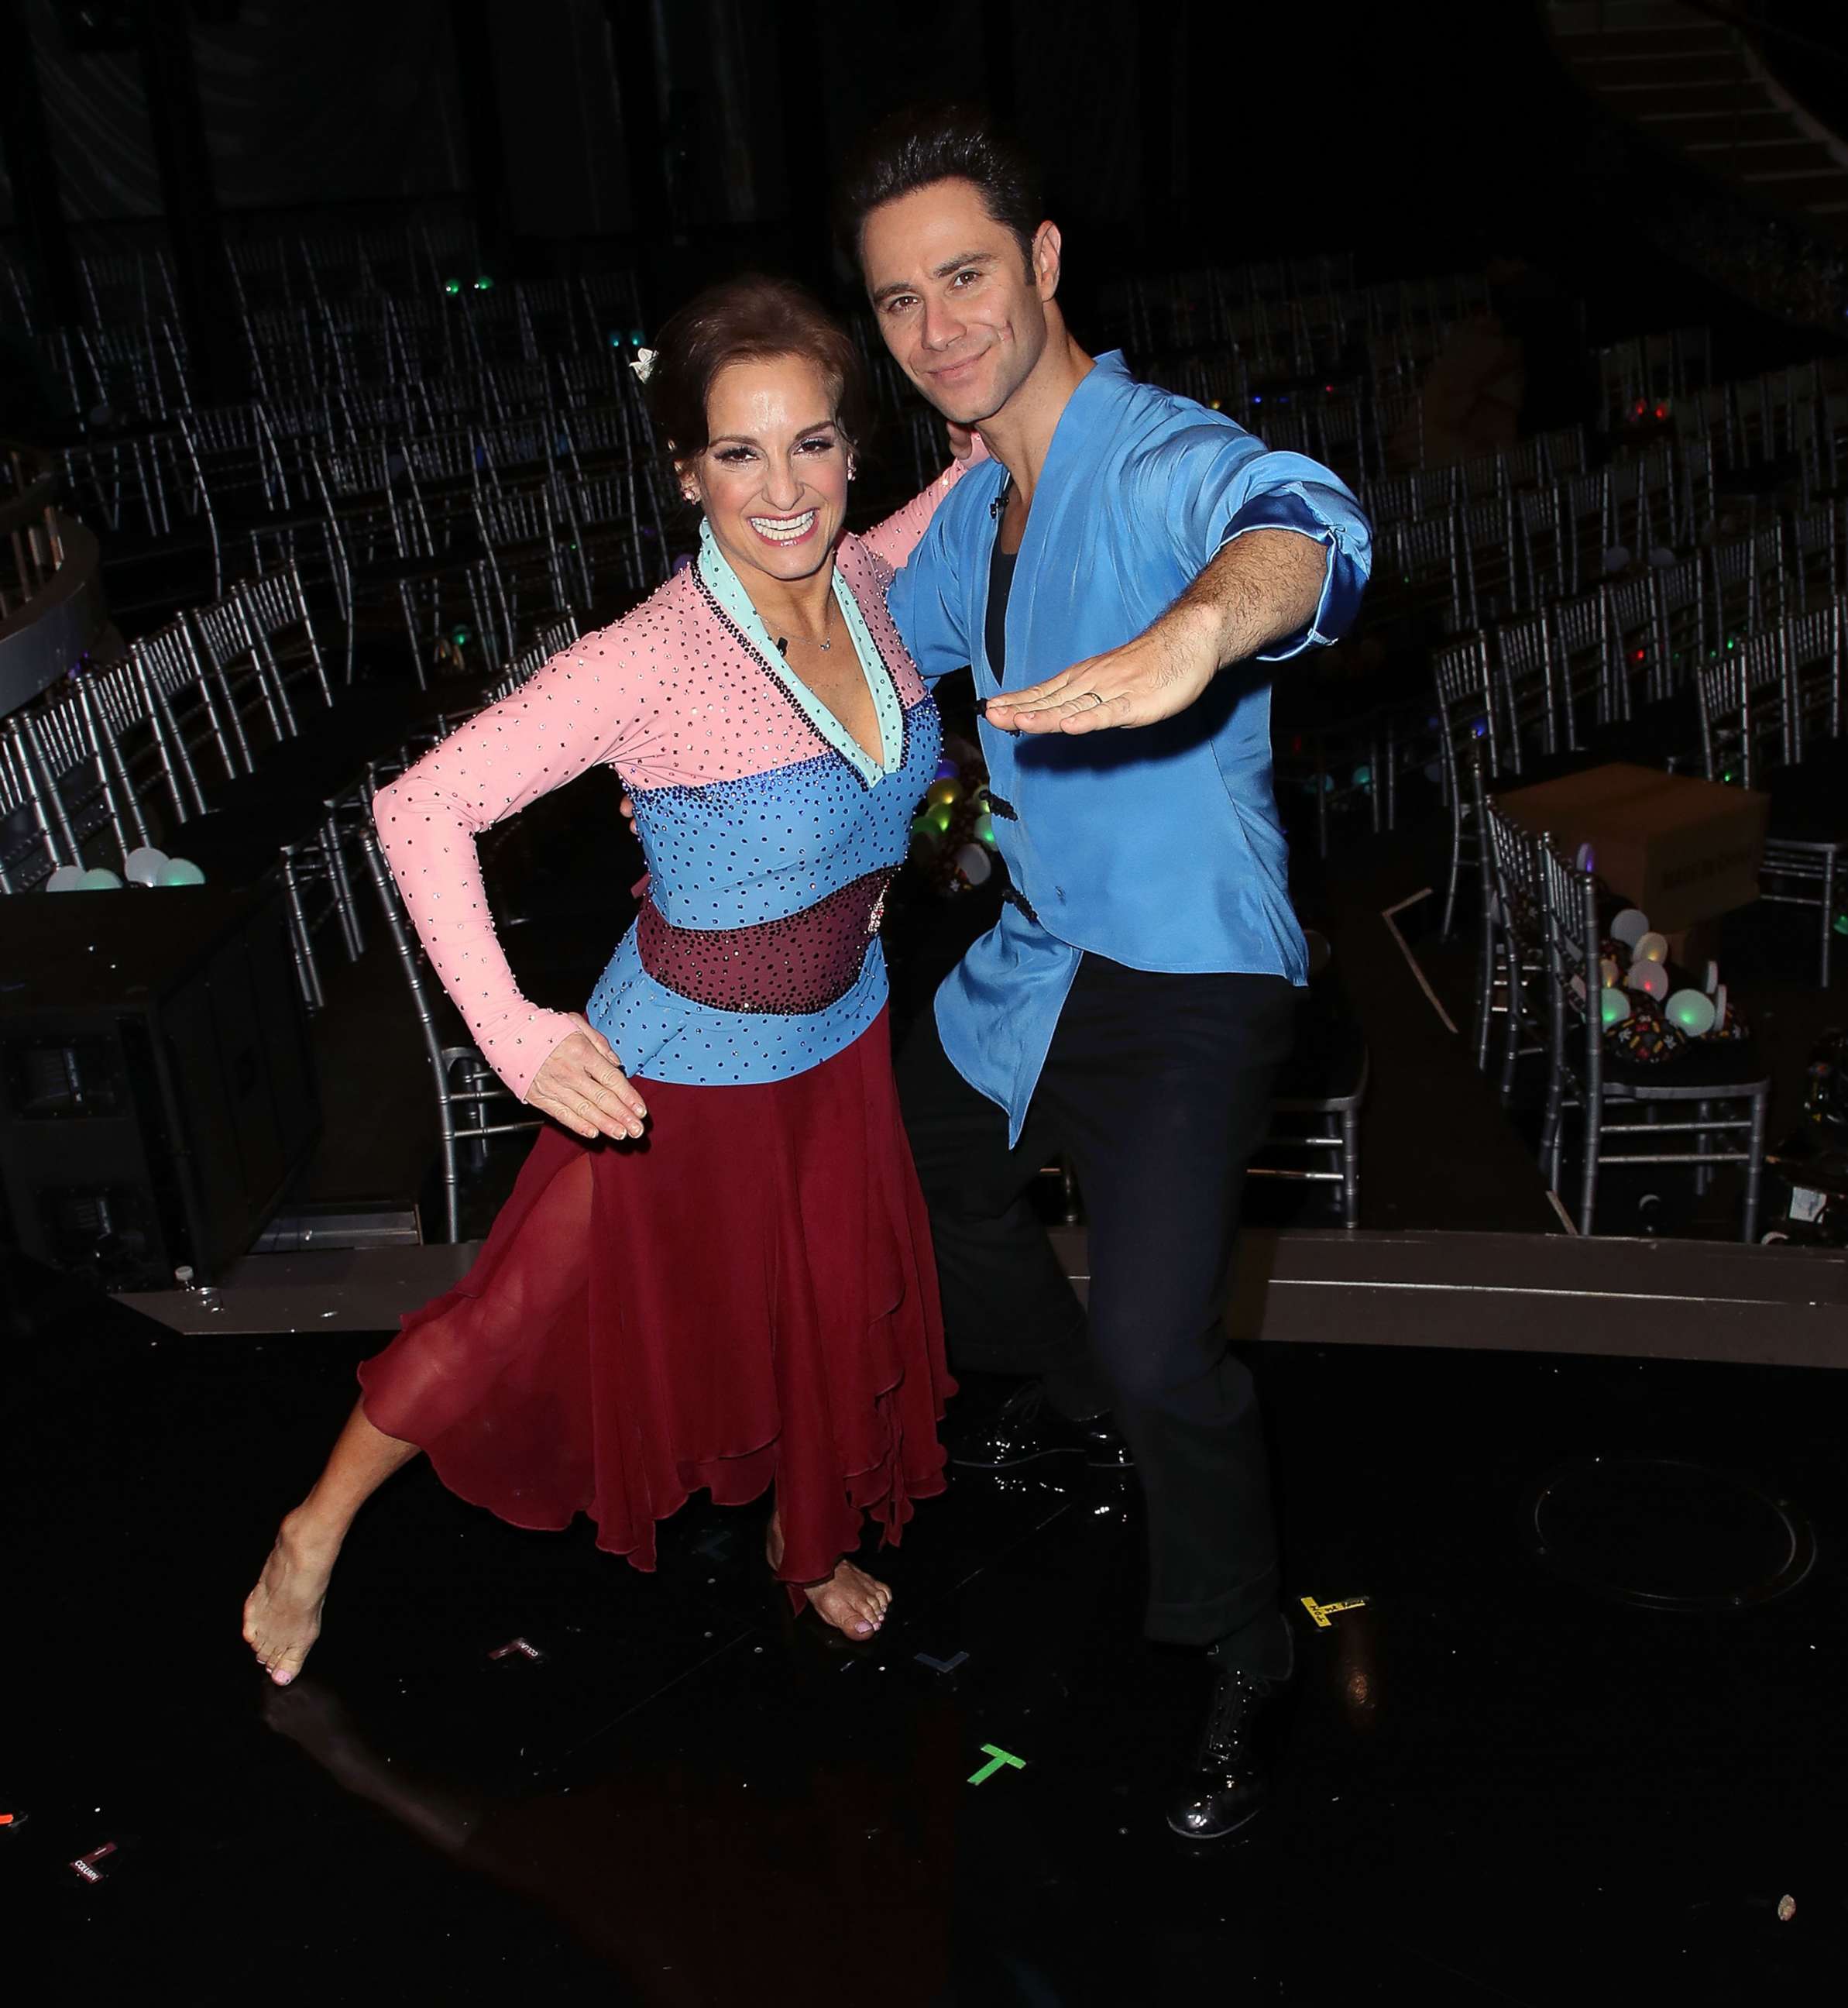 PHOTO: Mary Lou Retton (L) and Sasha Farber pose at "Dancing with the Stars" Season 27 at CBS Television City on Oct. 22, 2018 in Los Angeles.